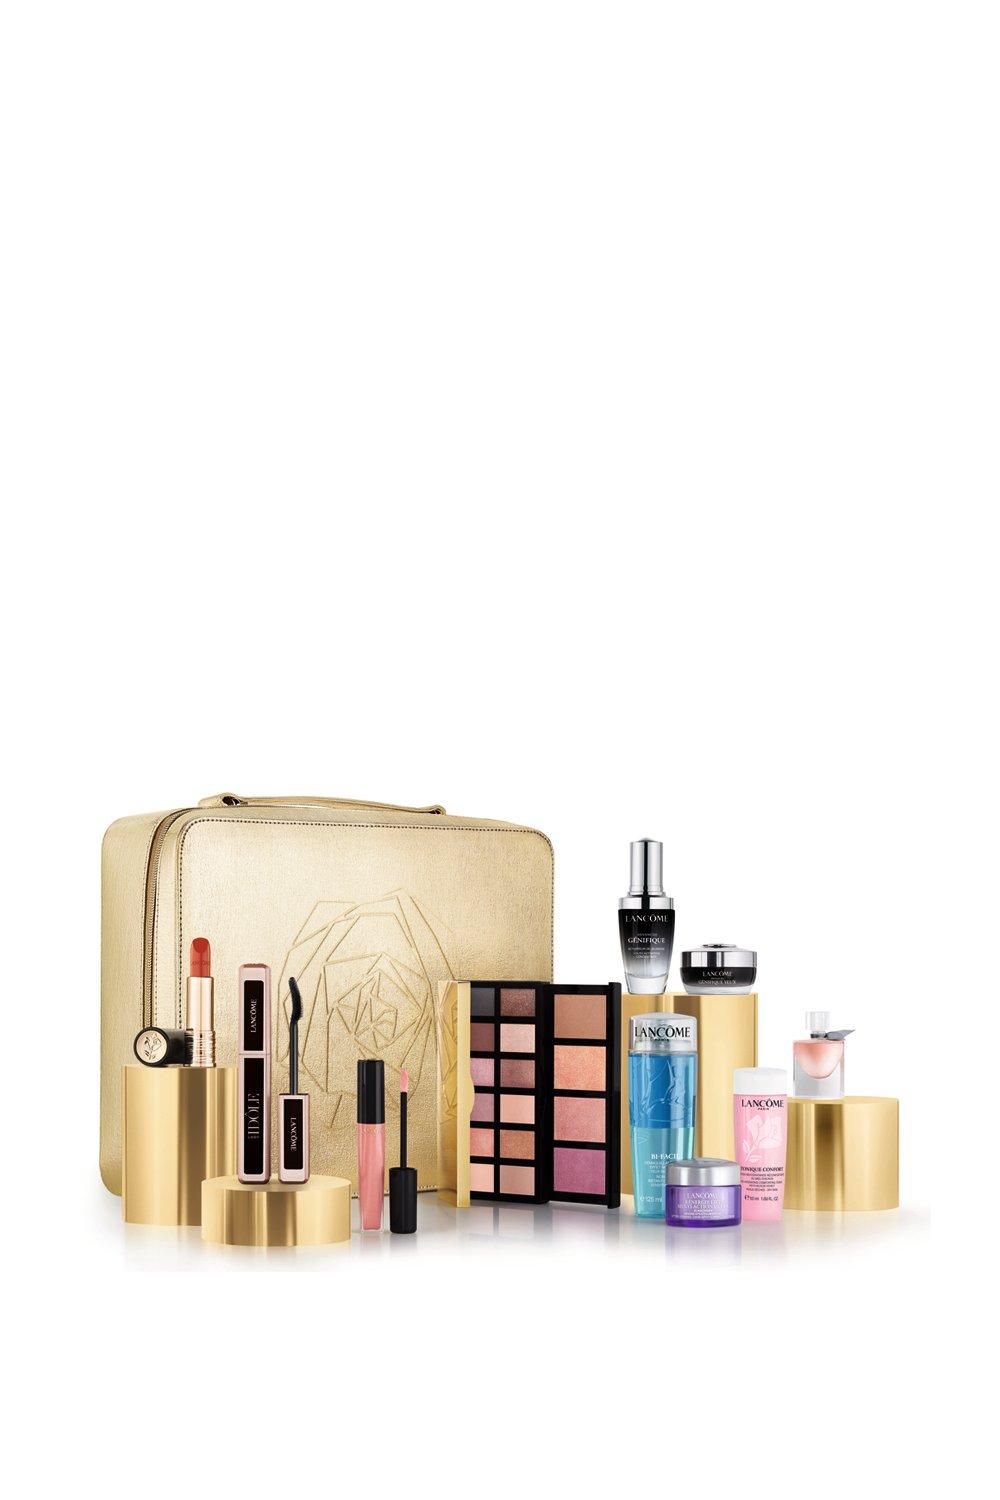 beauty box only £74 (when you spend £45 on lancôme)